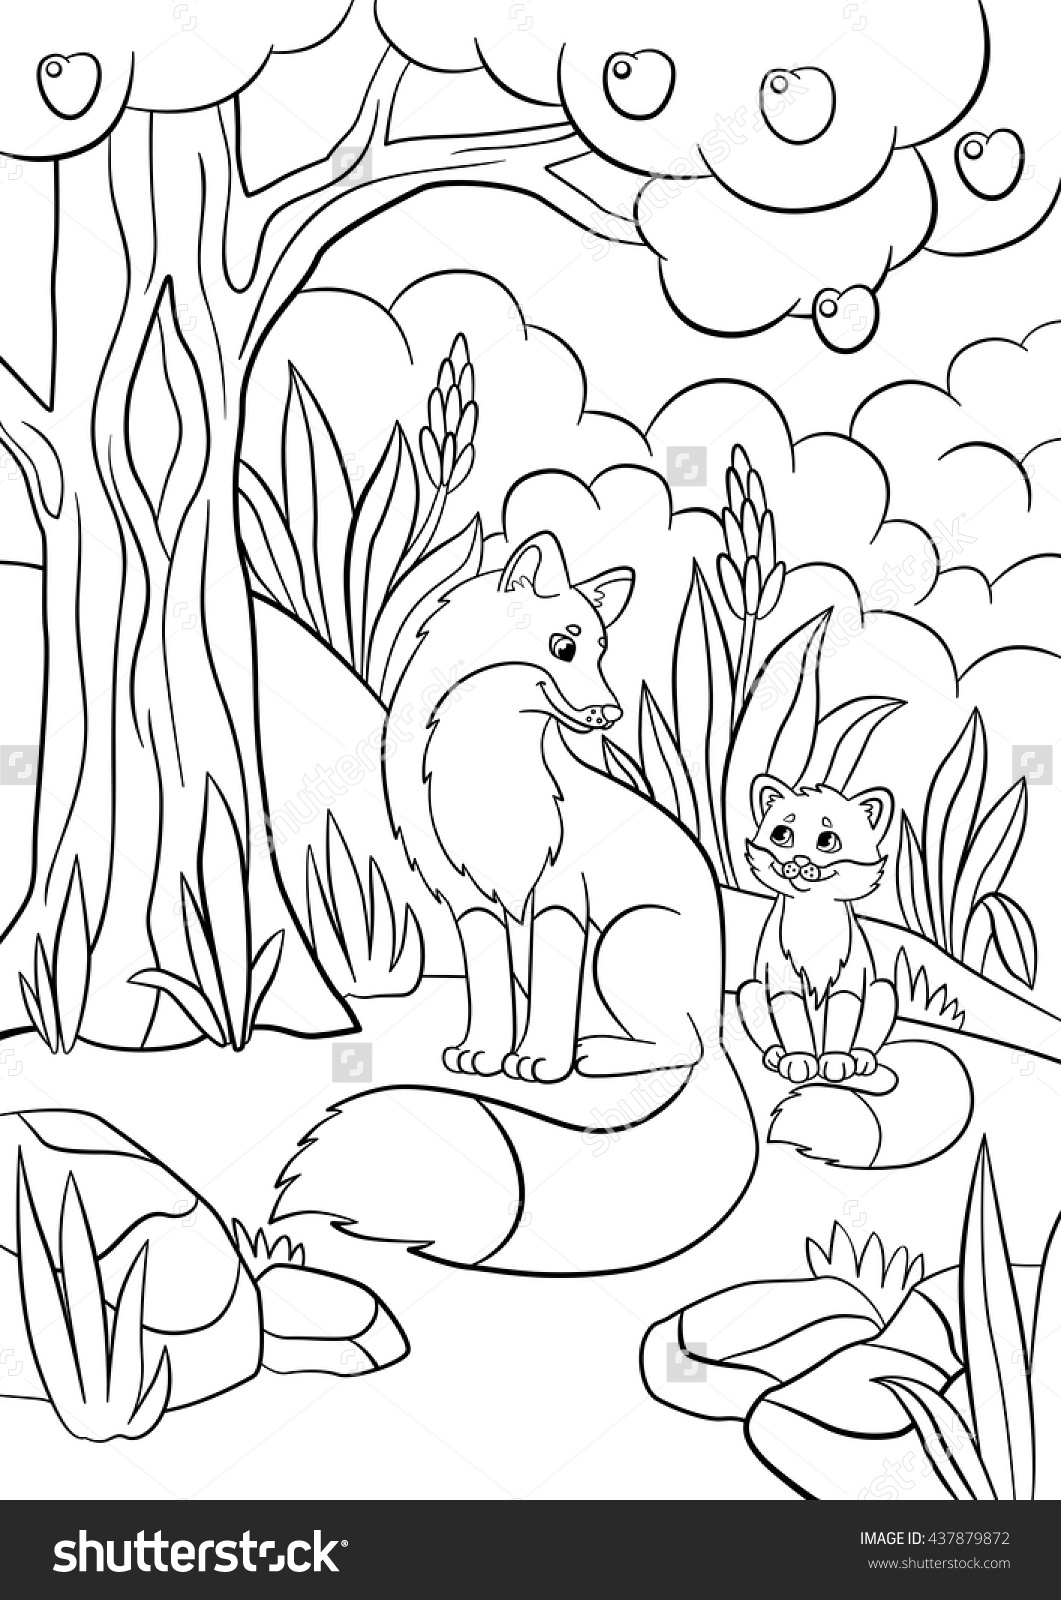 Baby Fox Coloring Pages at GetColorings.com | Free printable colorings